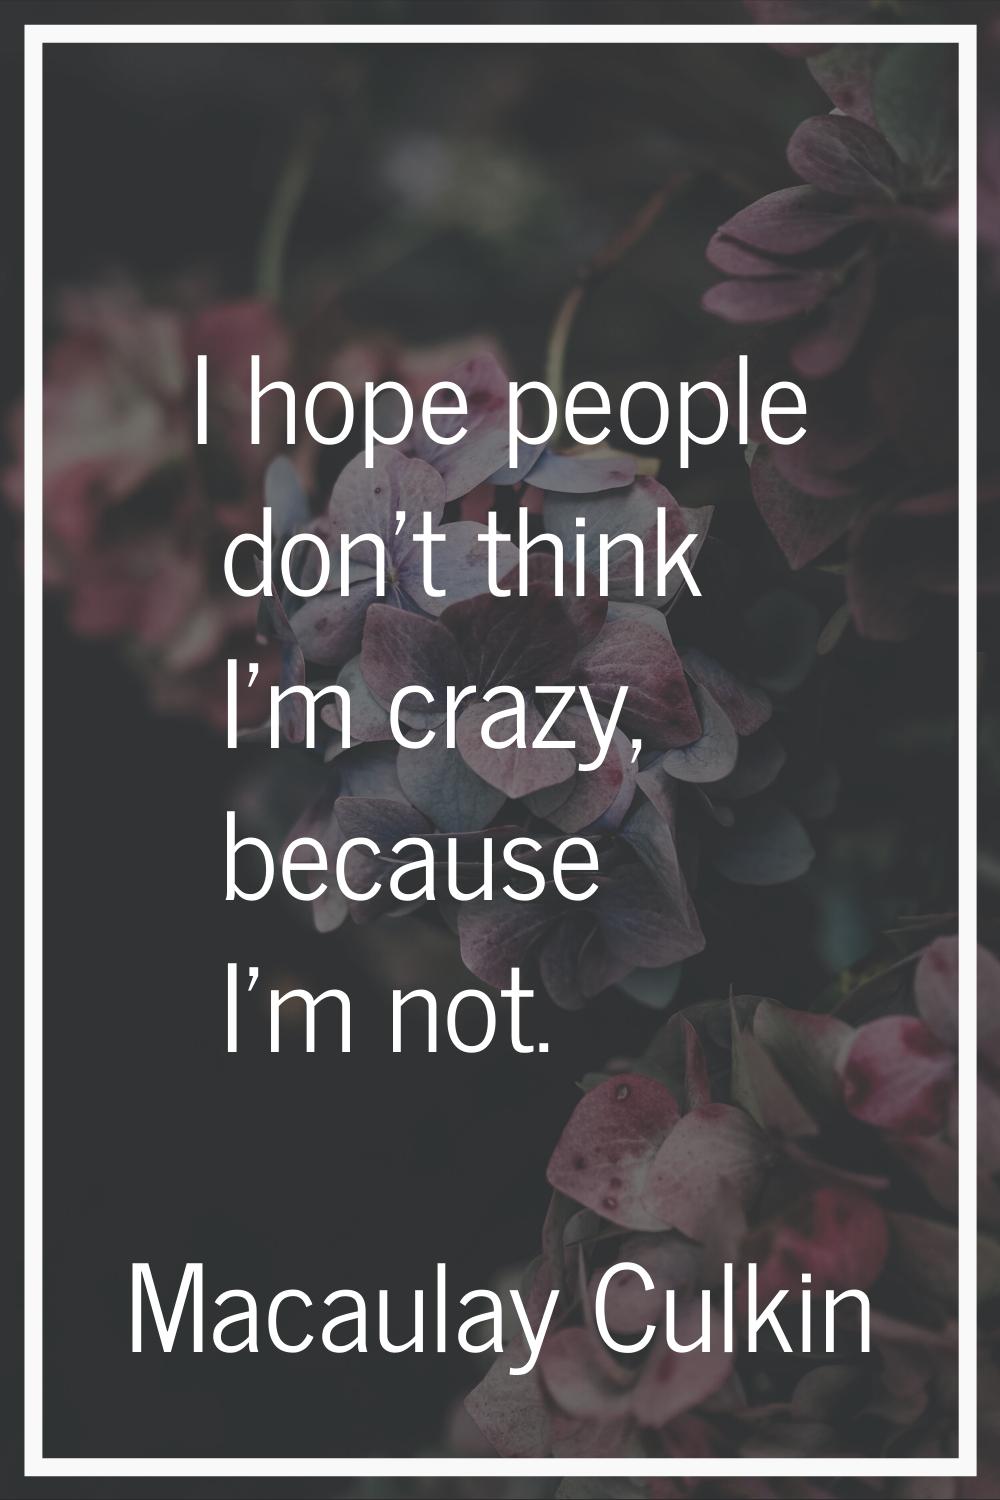 I hope people don't think I'm crazy, because I'm not.